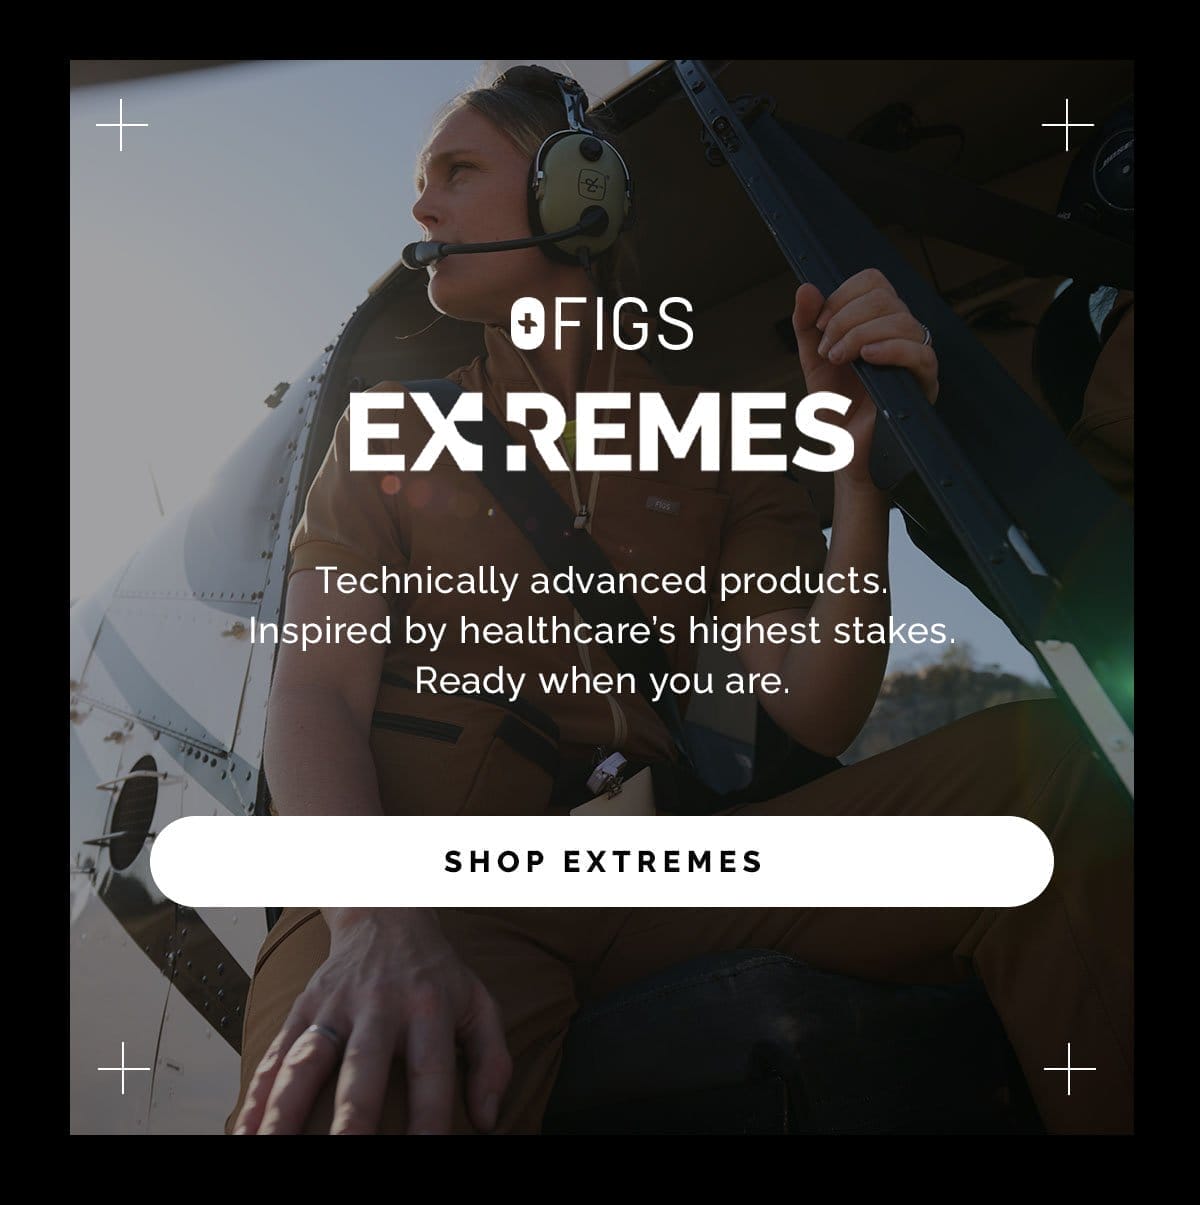 SHOP EXTREMES